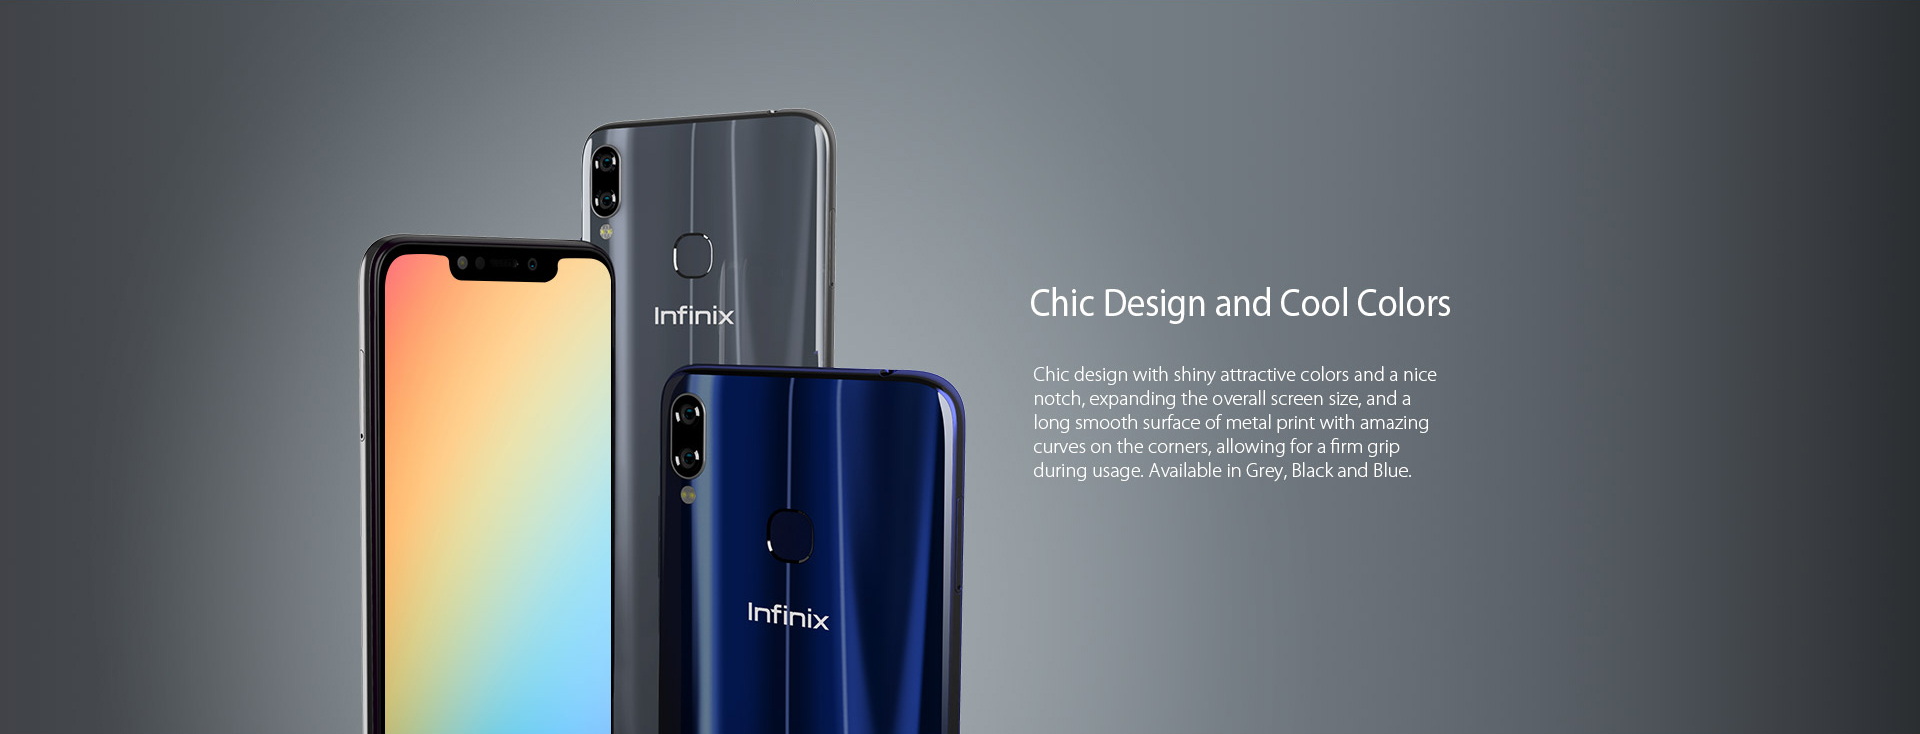 Infinix Hot S3X Specifications, Review and Price